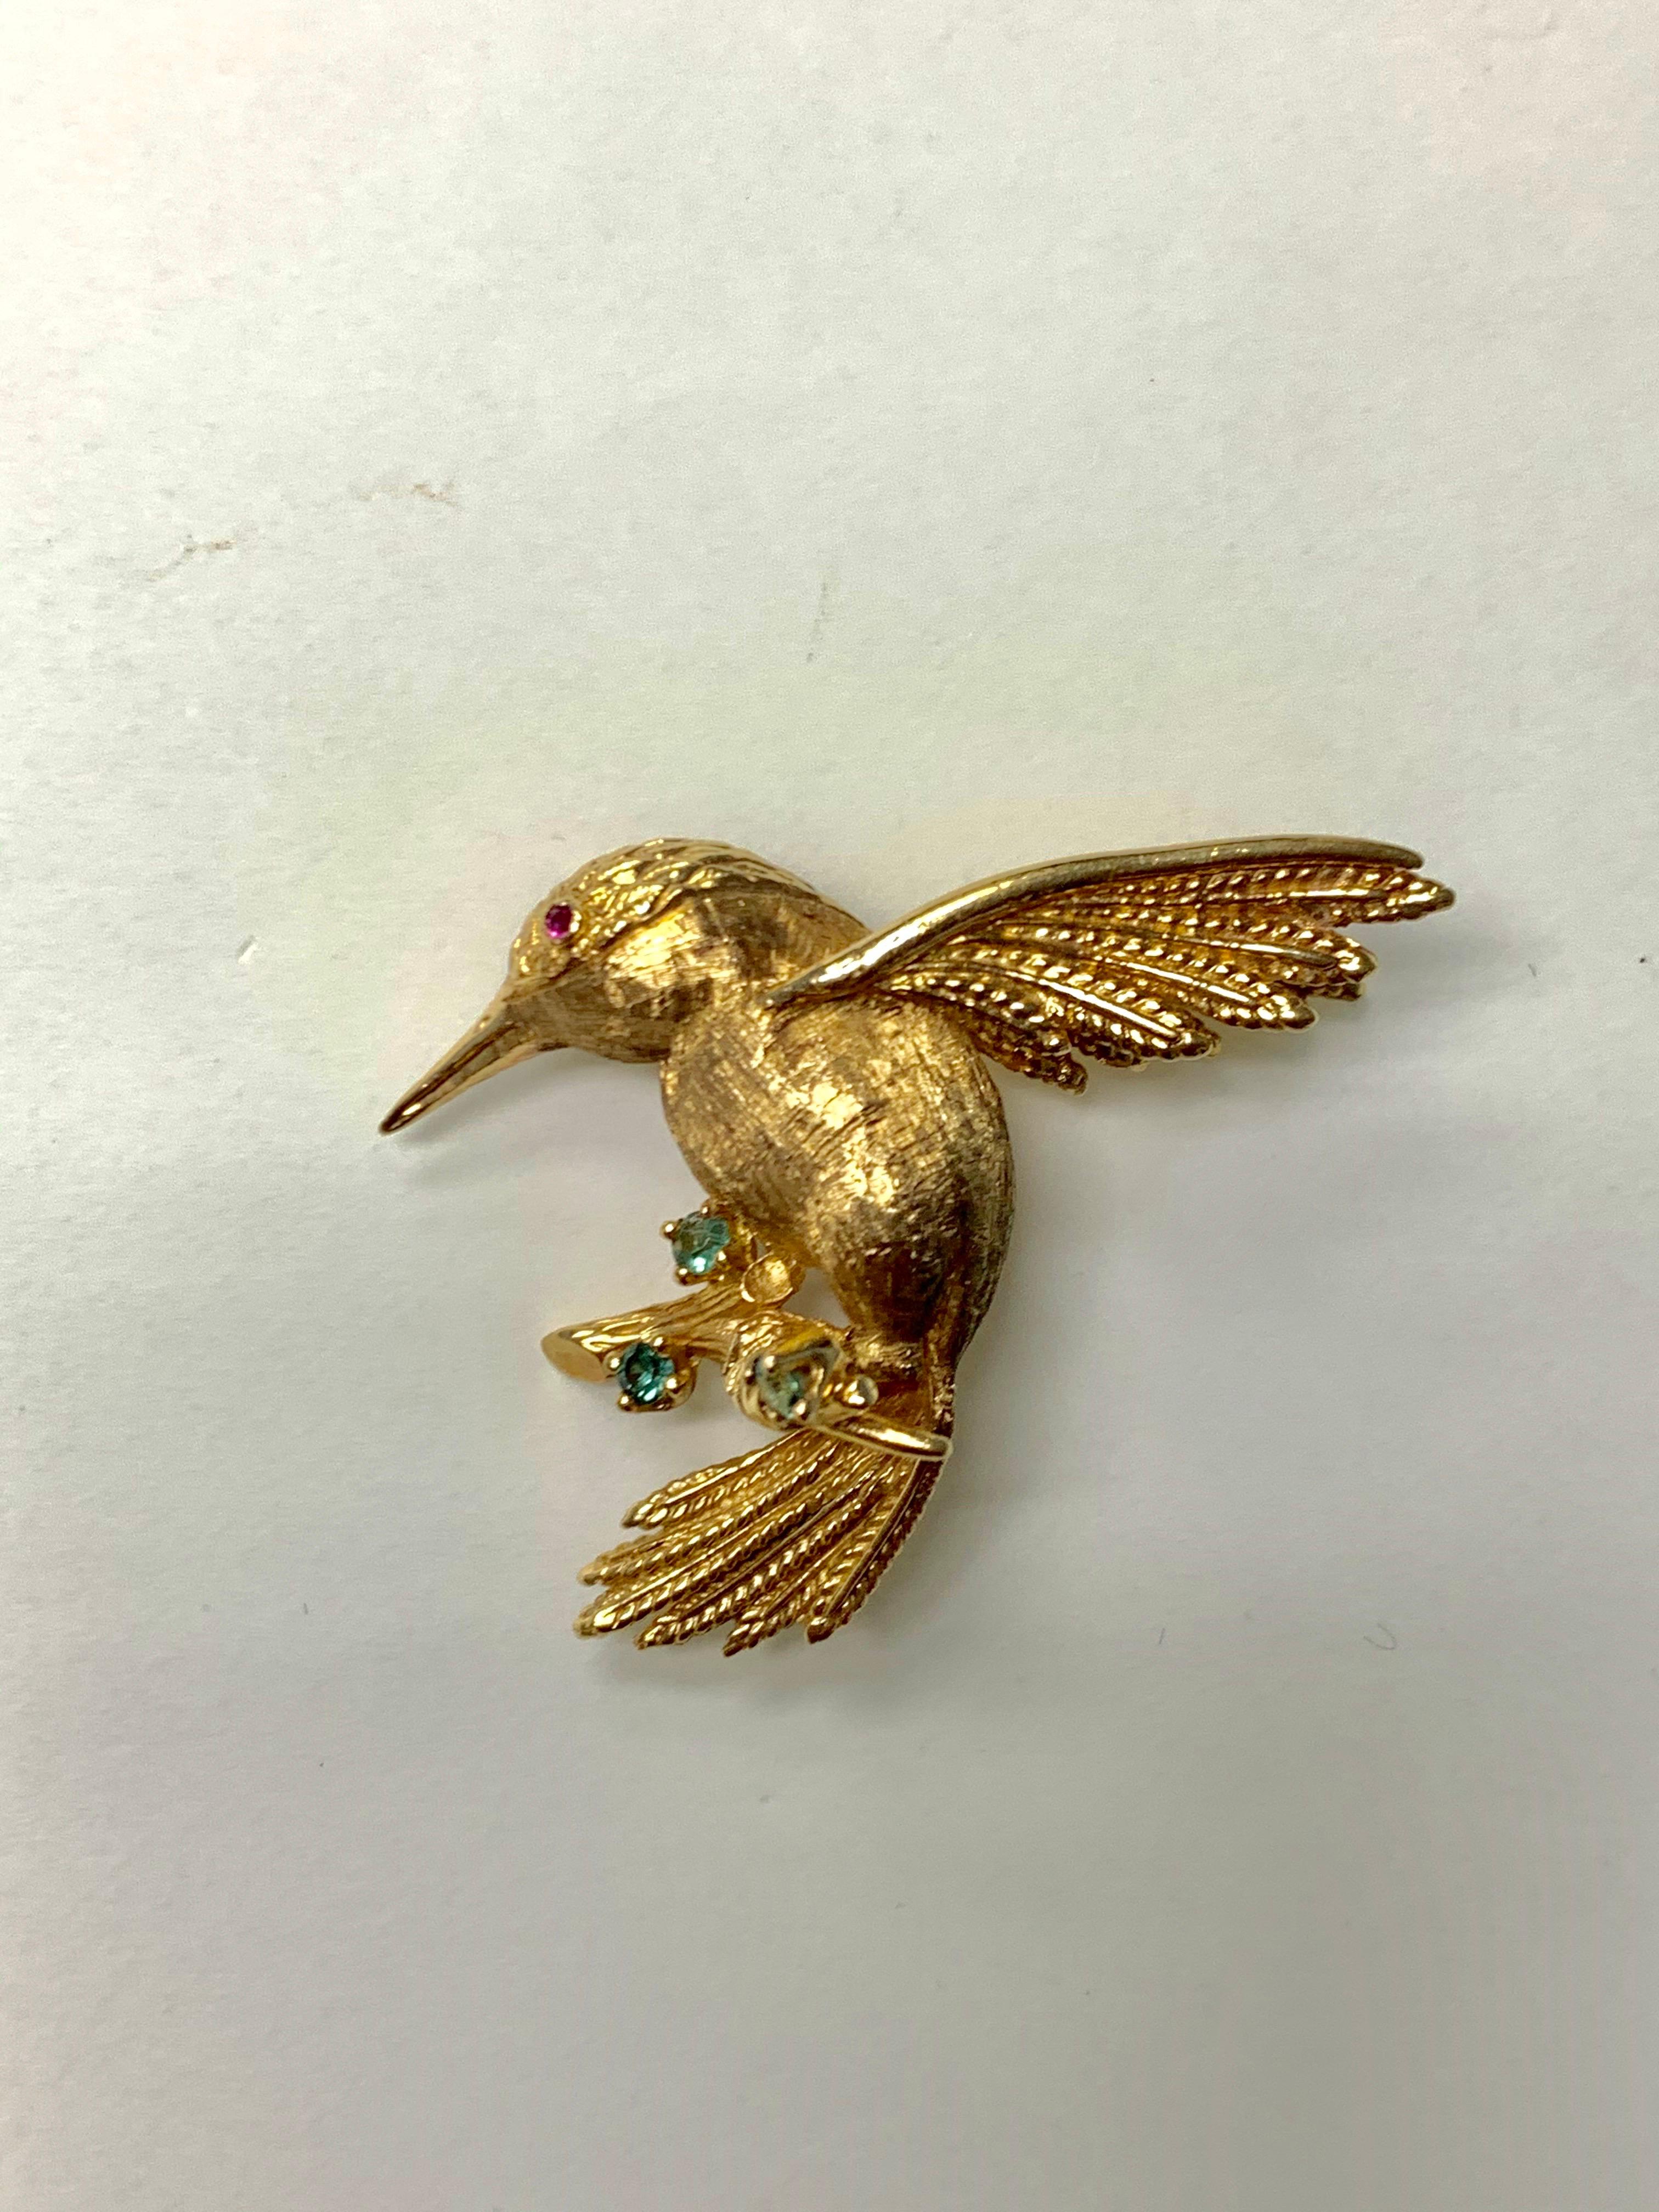 Emerald, ruby and 14k yellow gold bird pin. 
Gold weight : 15.4 grams 
Metal : 14k 
measurements : 1 1/2 inches by 2 inches
